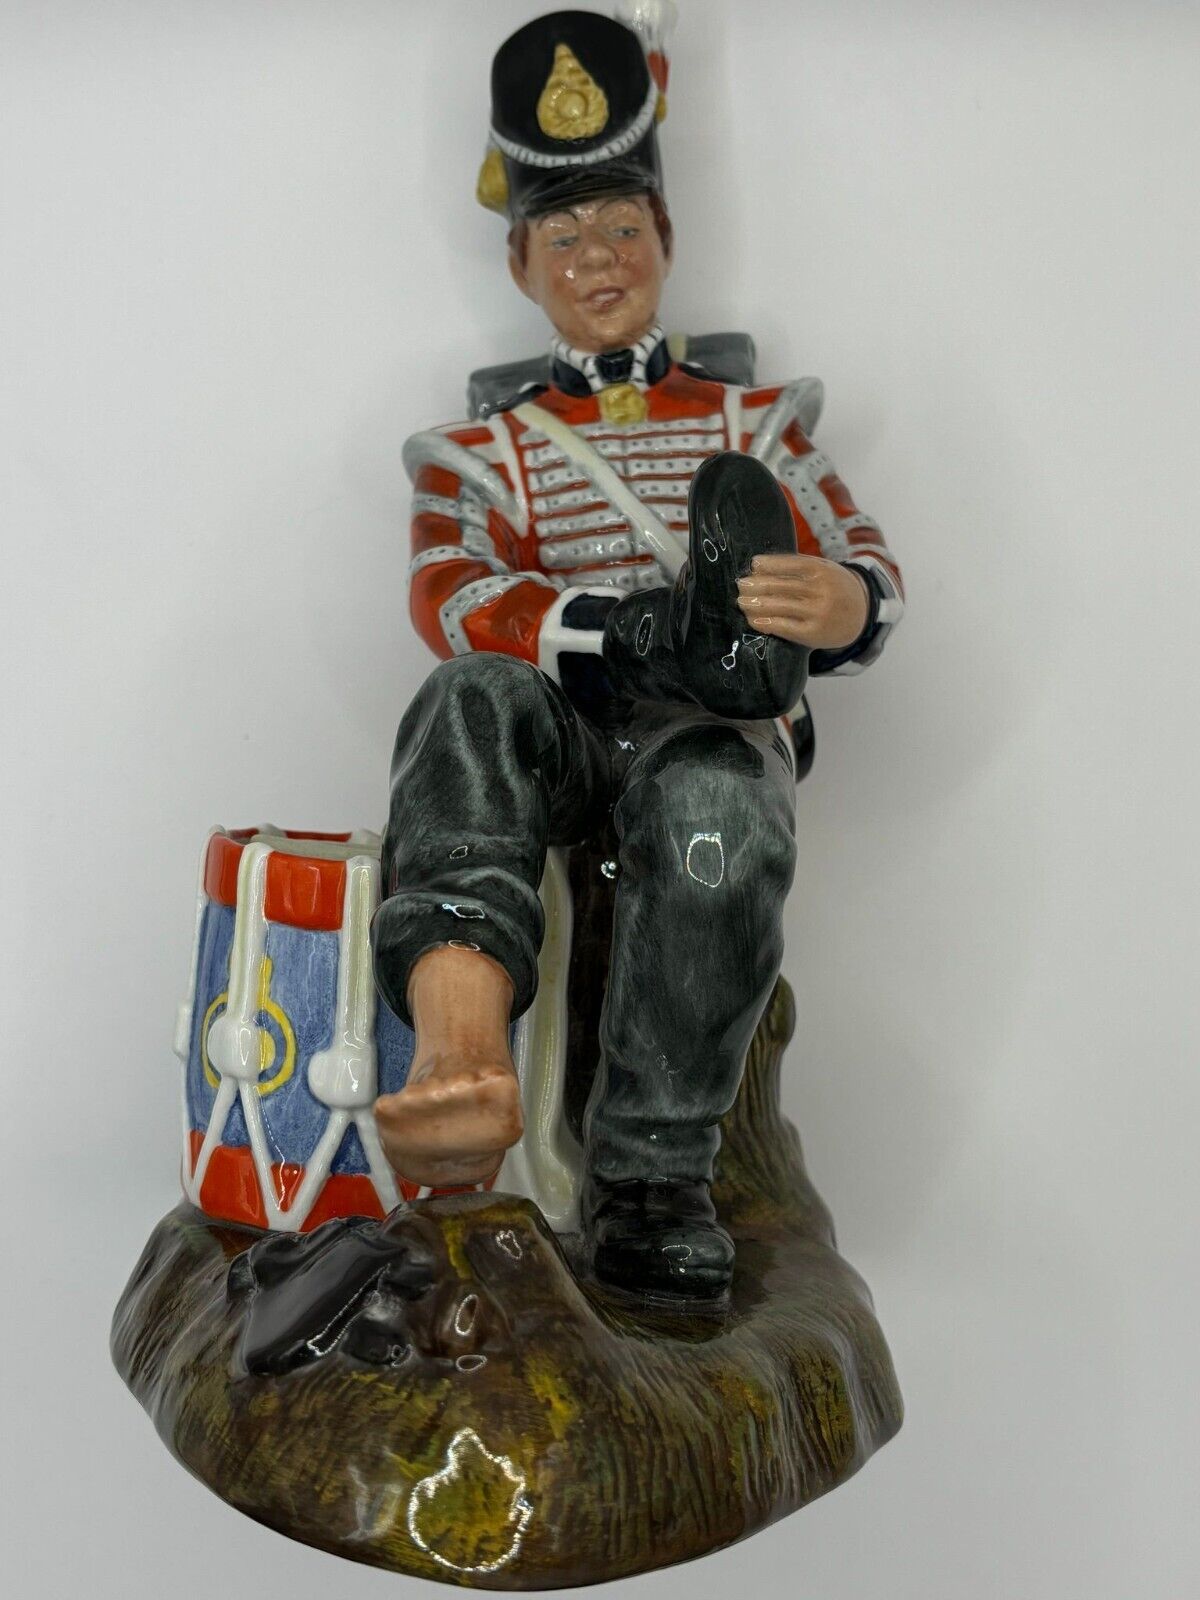 ROYAL DOULTON Drummer Boy HN2679 Figurine Retired Collectible - EXCELLENT SIGNED